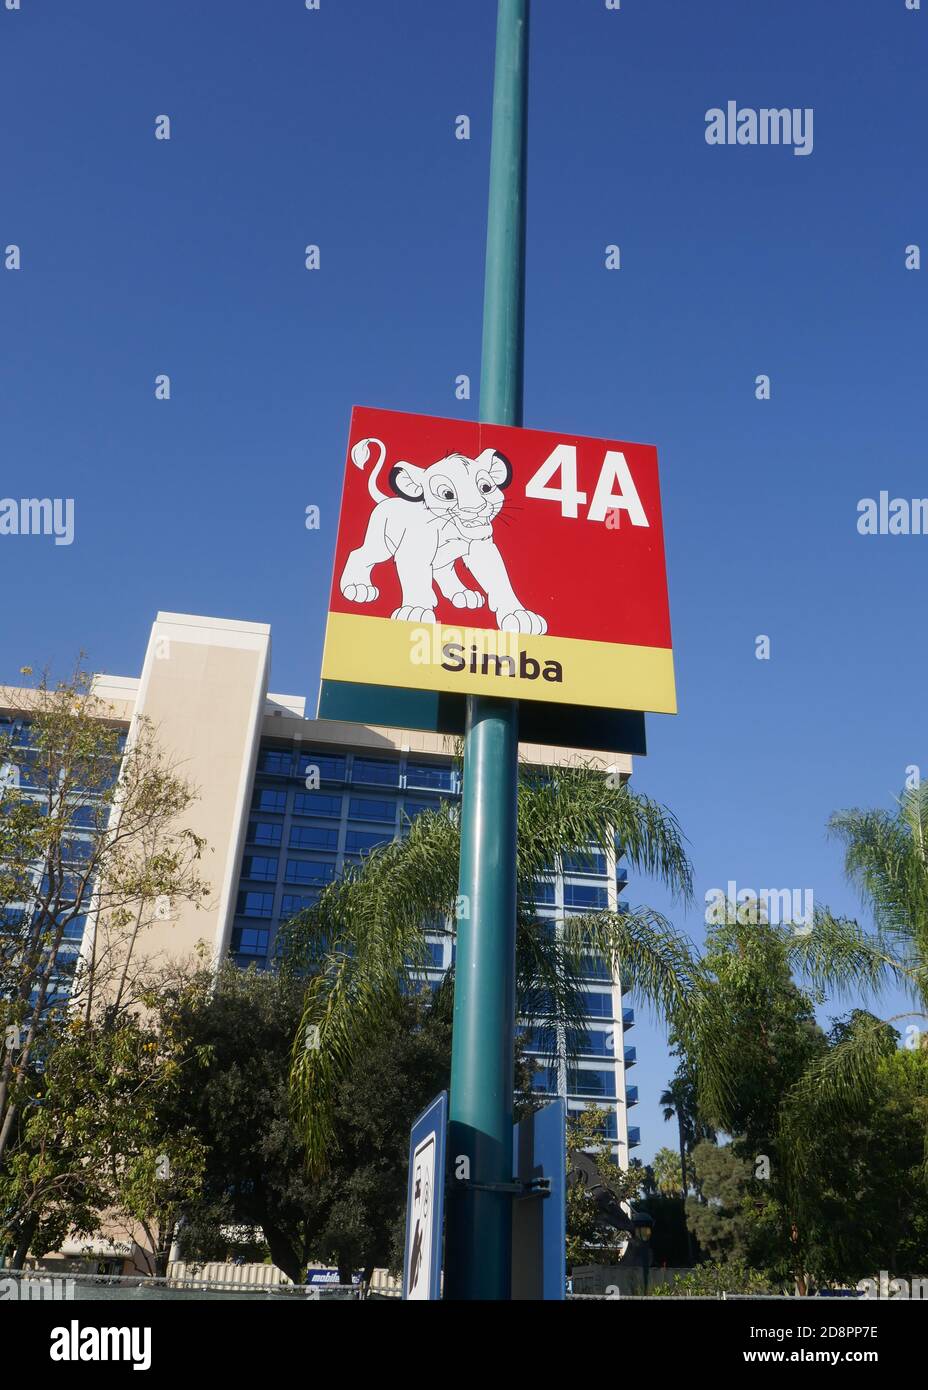 Anaheim, California, USA 30th October 2020 A general view of atmosphere of Simba Parking Lot and Downtown Disney on October 30, 2020 in Anaheim, California, USA. Photo by Barry King/Alamy Stock Photo Stock Photo